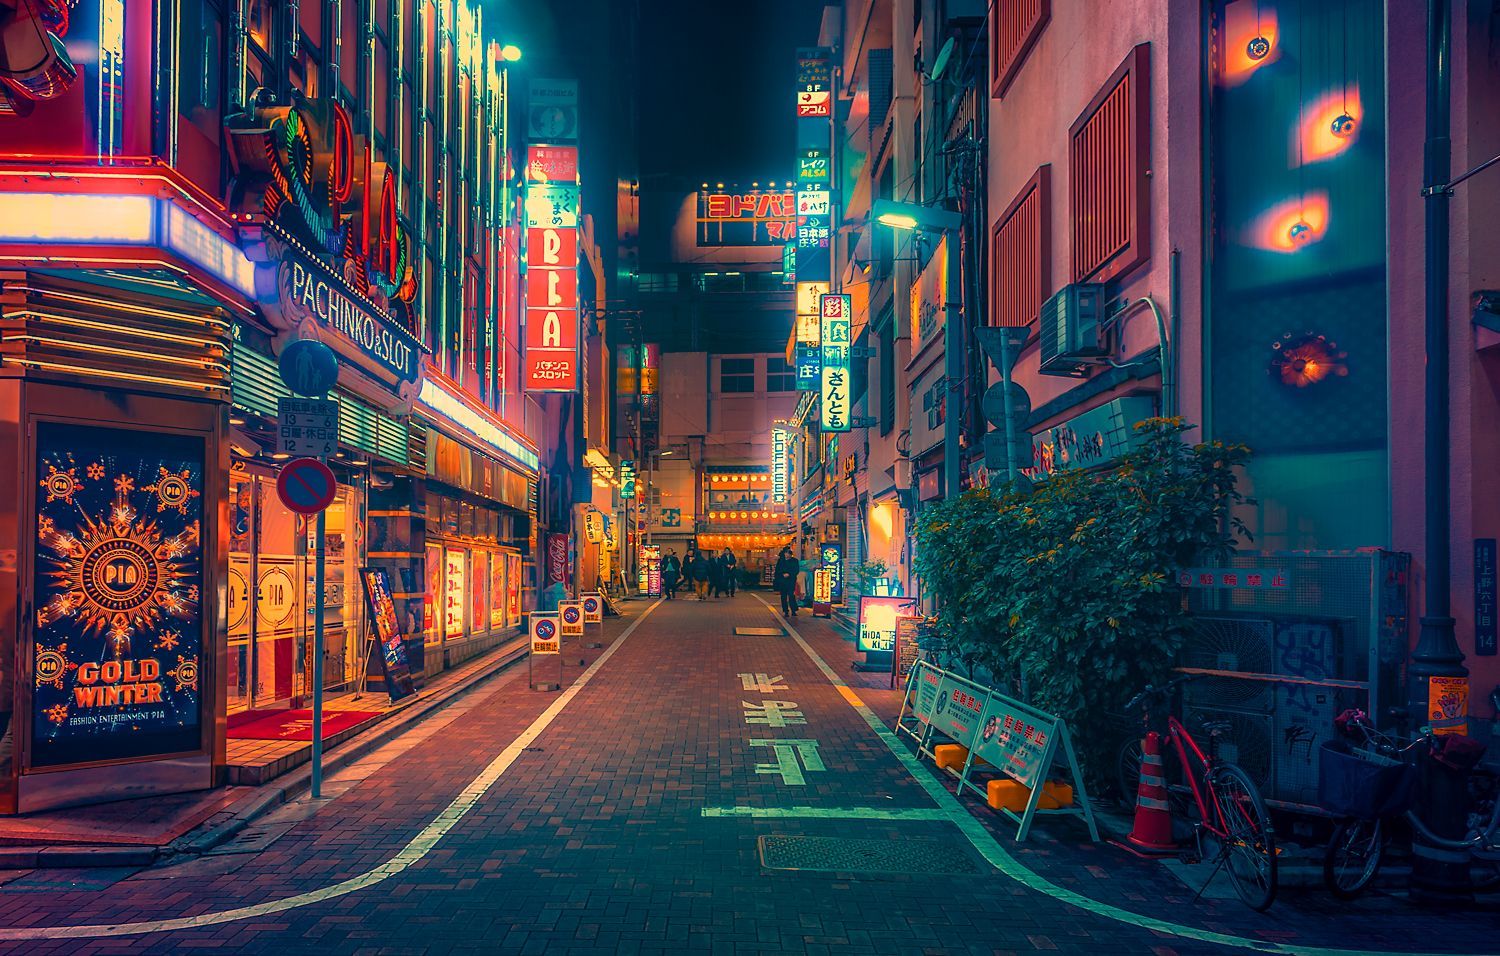 A street in Tokyo at night with neon lights and colorful signs. - Tokyo